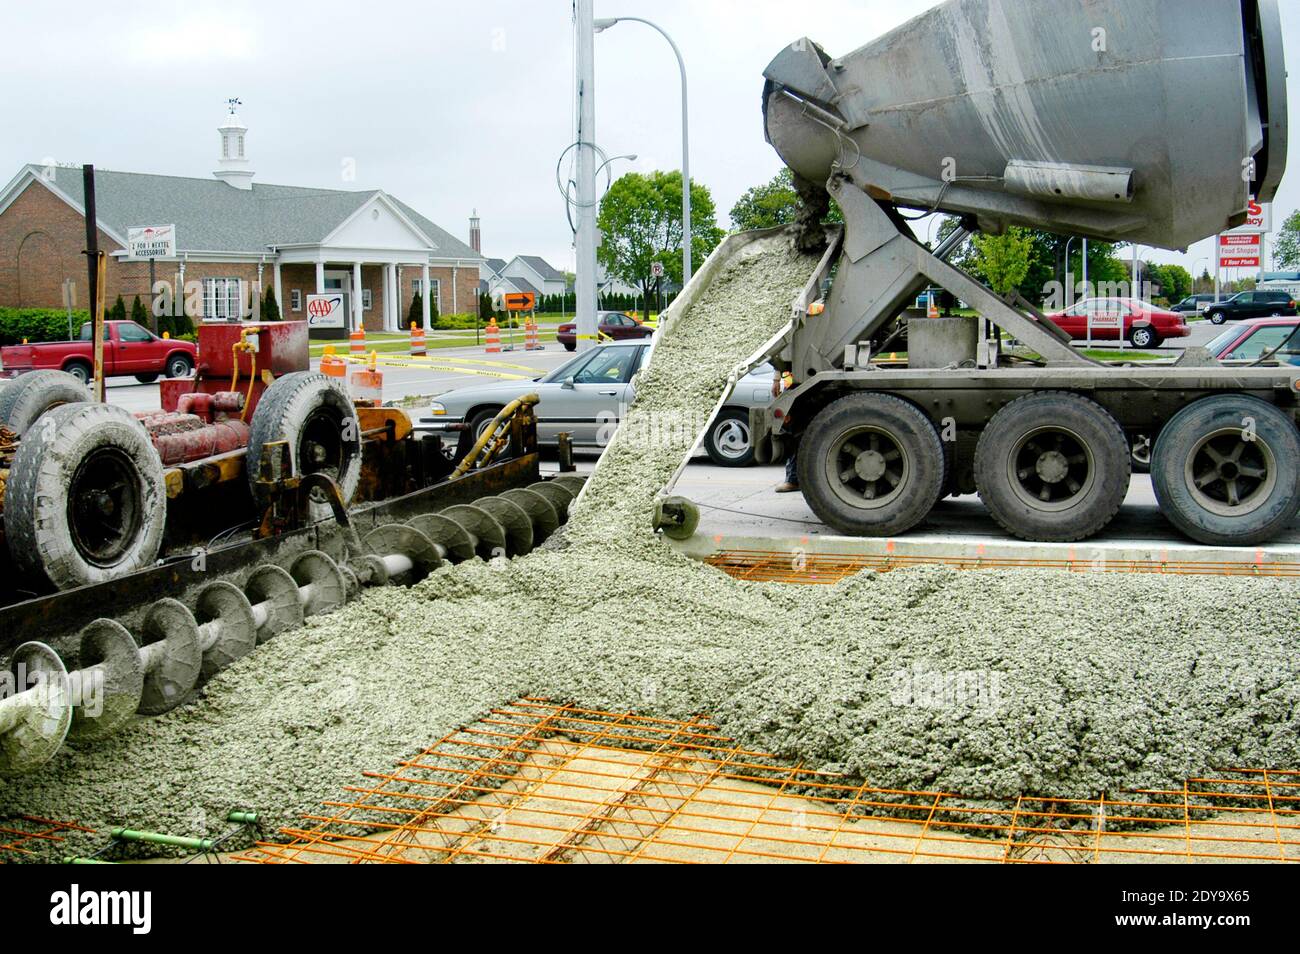 These are the two ways to get concrete from the truck to poured in